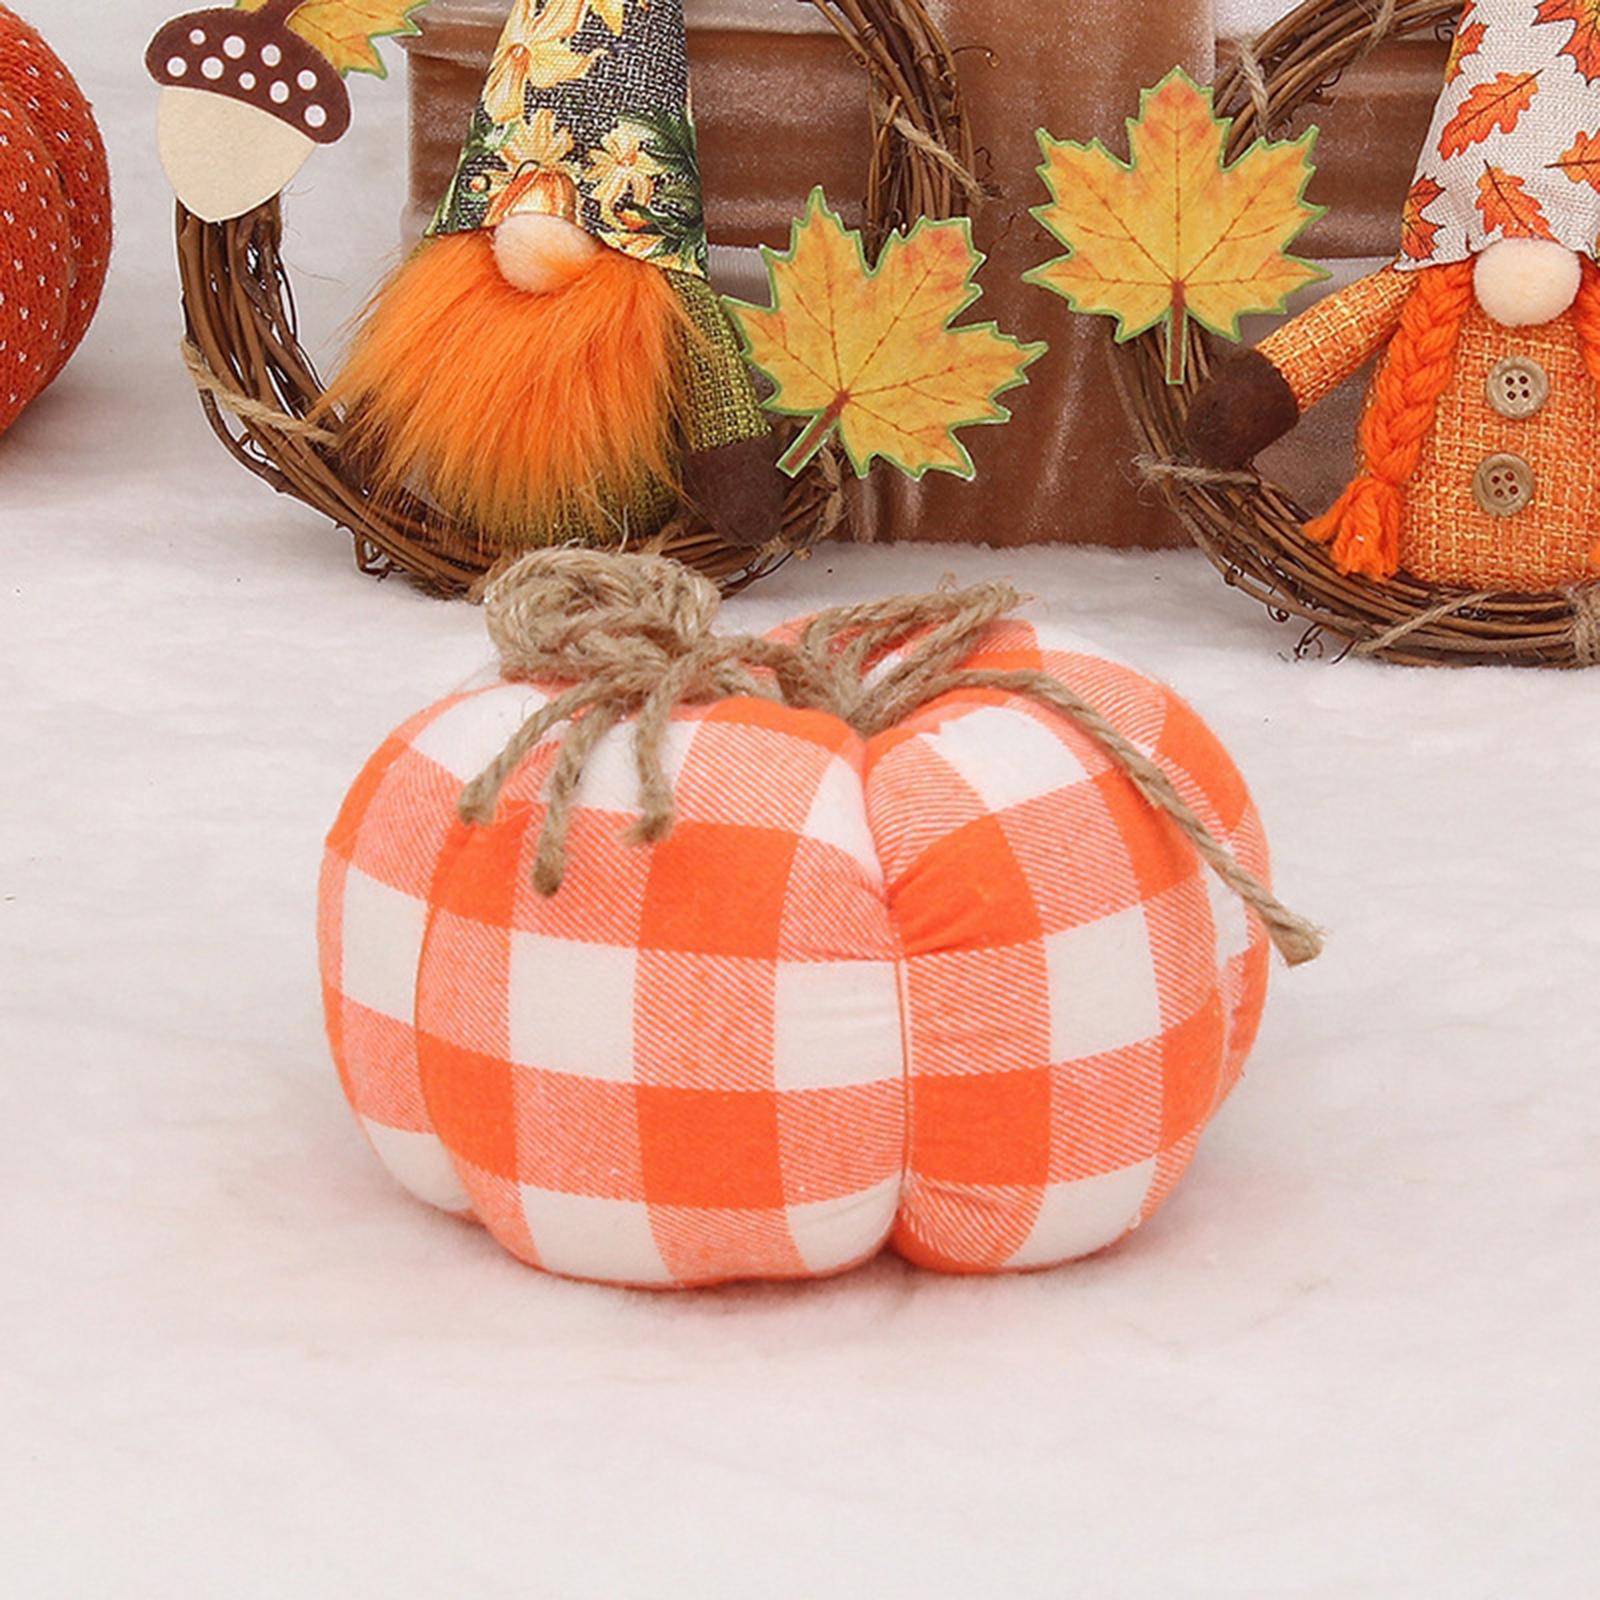 Plaid Fabric Pumpkin Thanksgiving Autumn Harvest for Home Fireplace Holiday 15cmx10cm